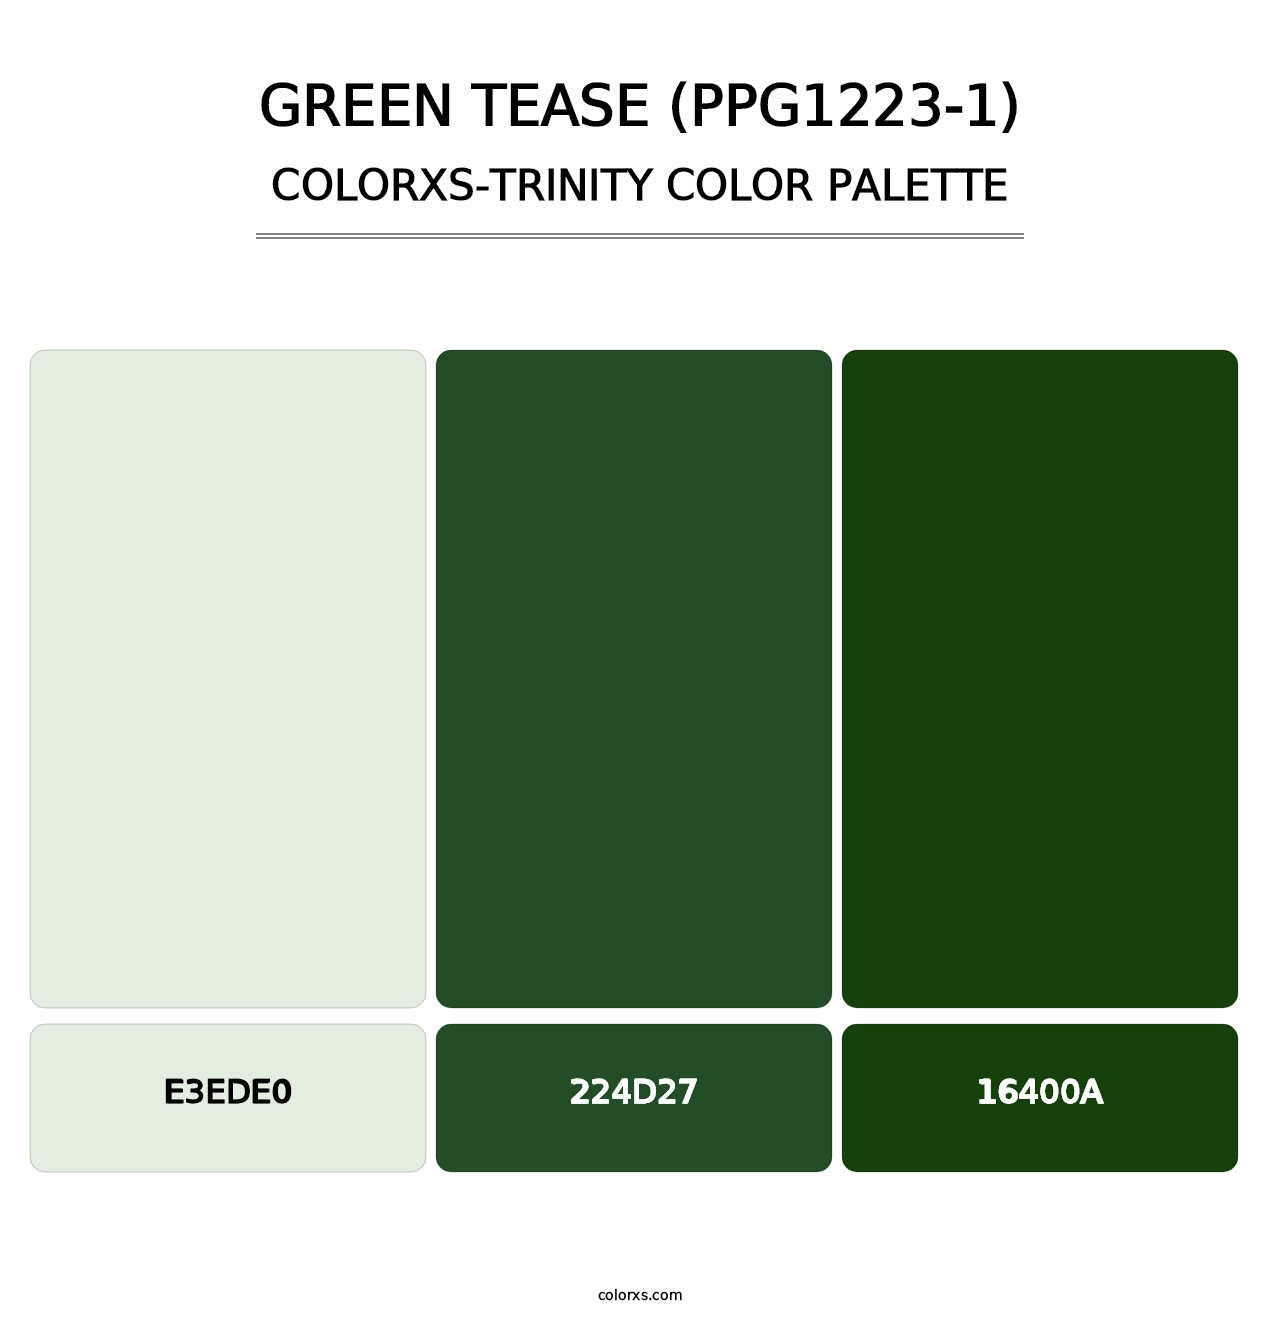 Green Tease (PPG1223-1) - Colorxs Trinity Palette